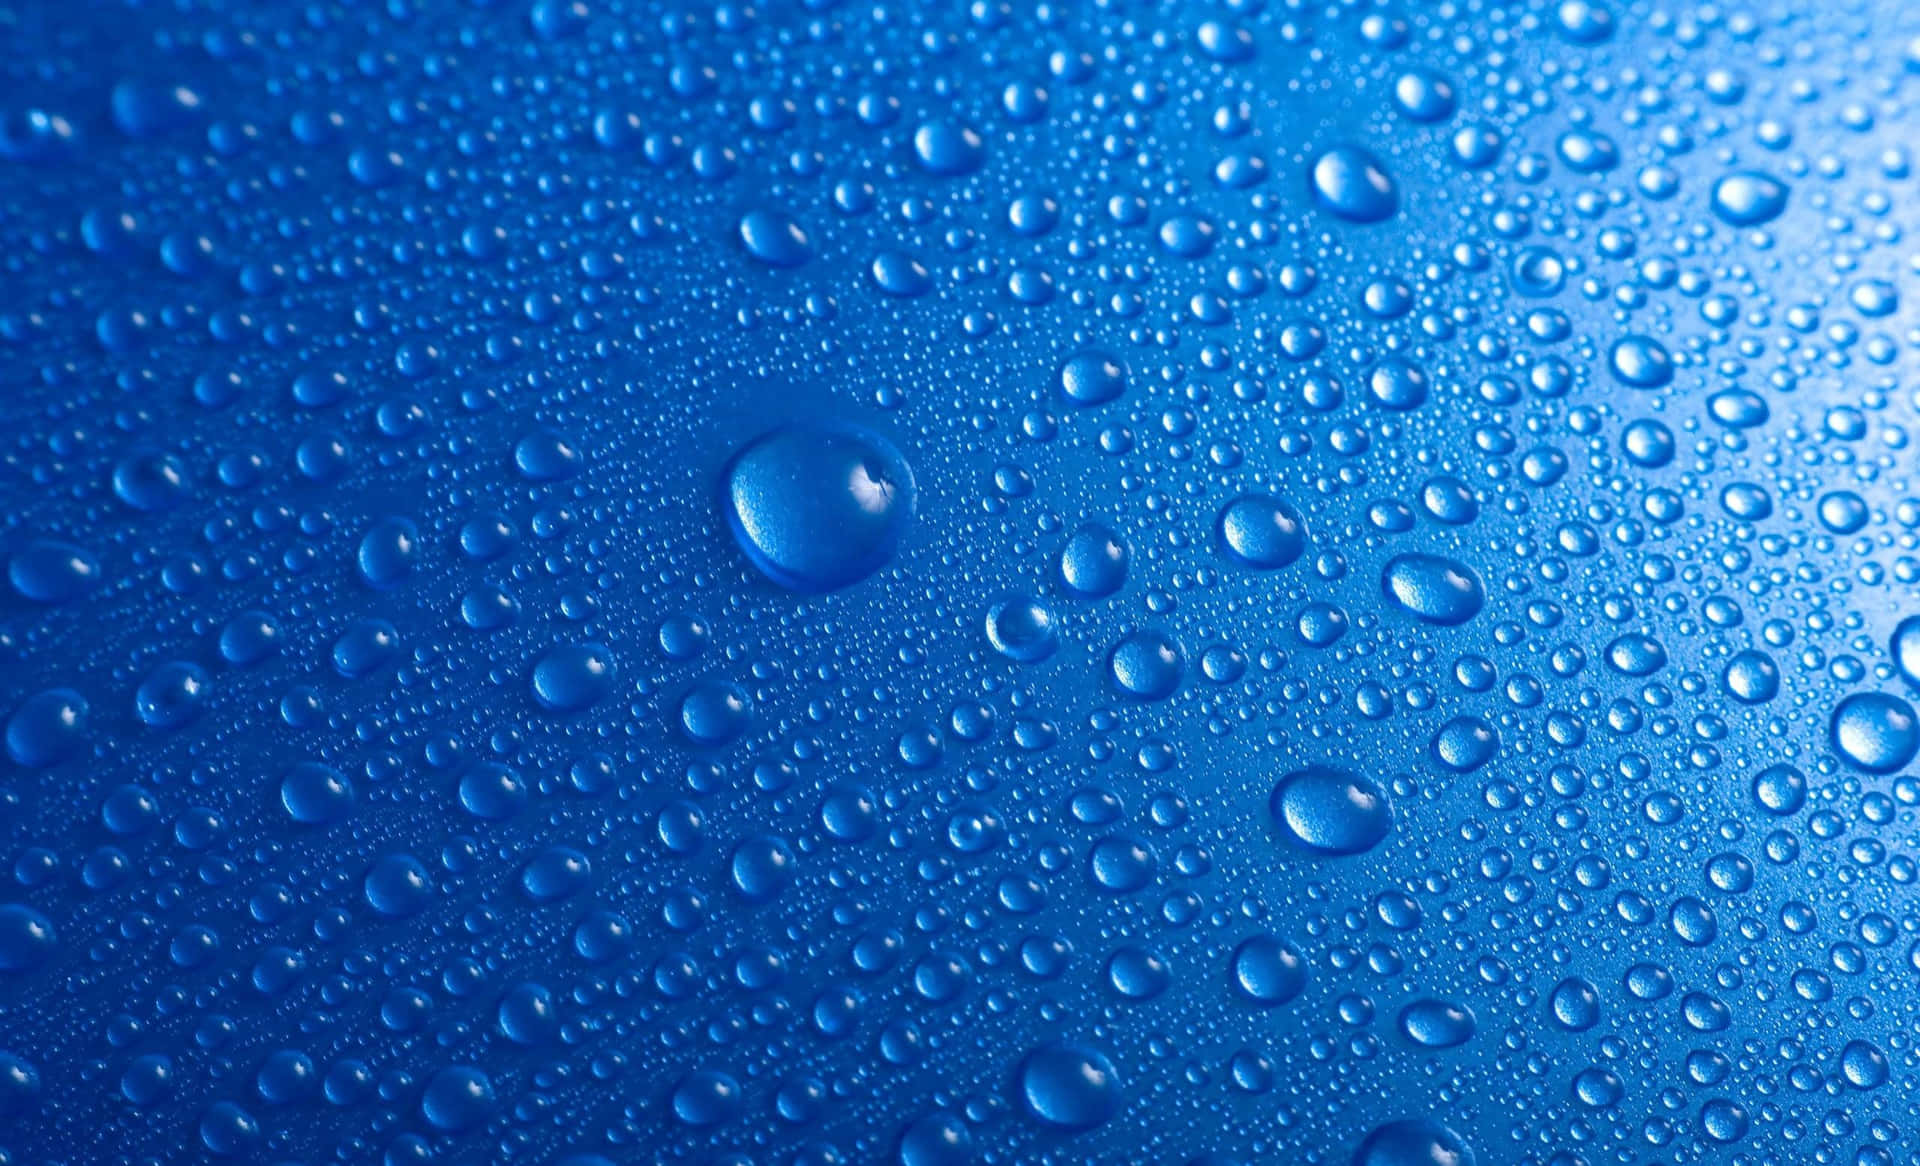 Blue Water Droplets On A Blue Surface